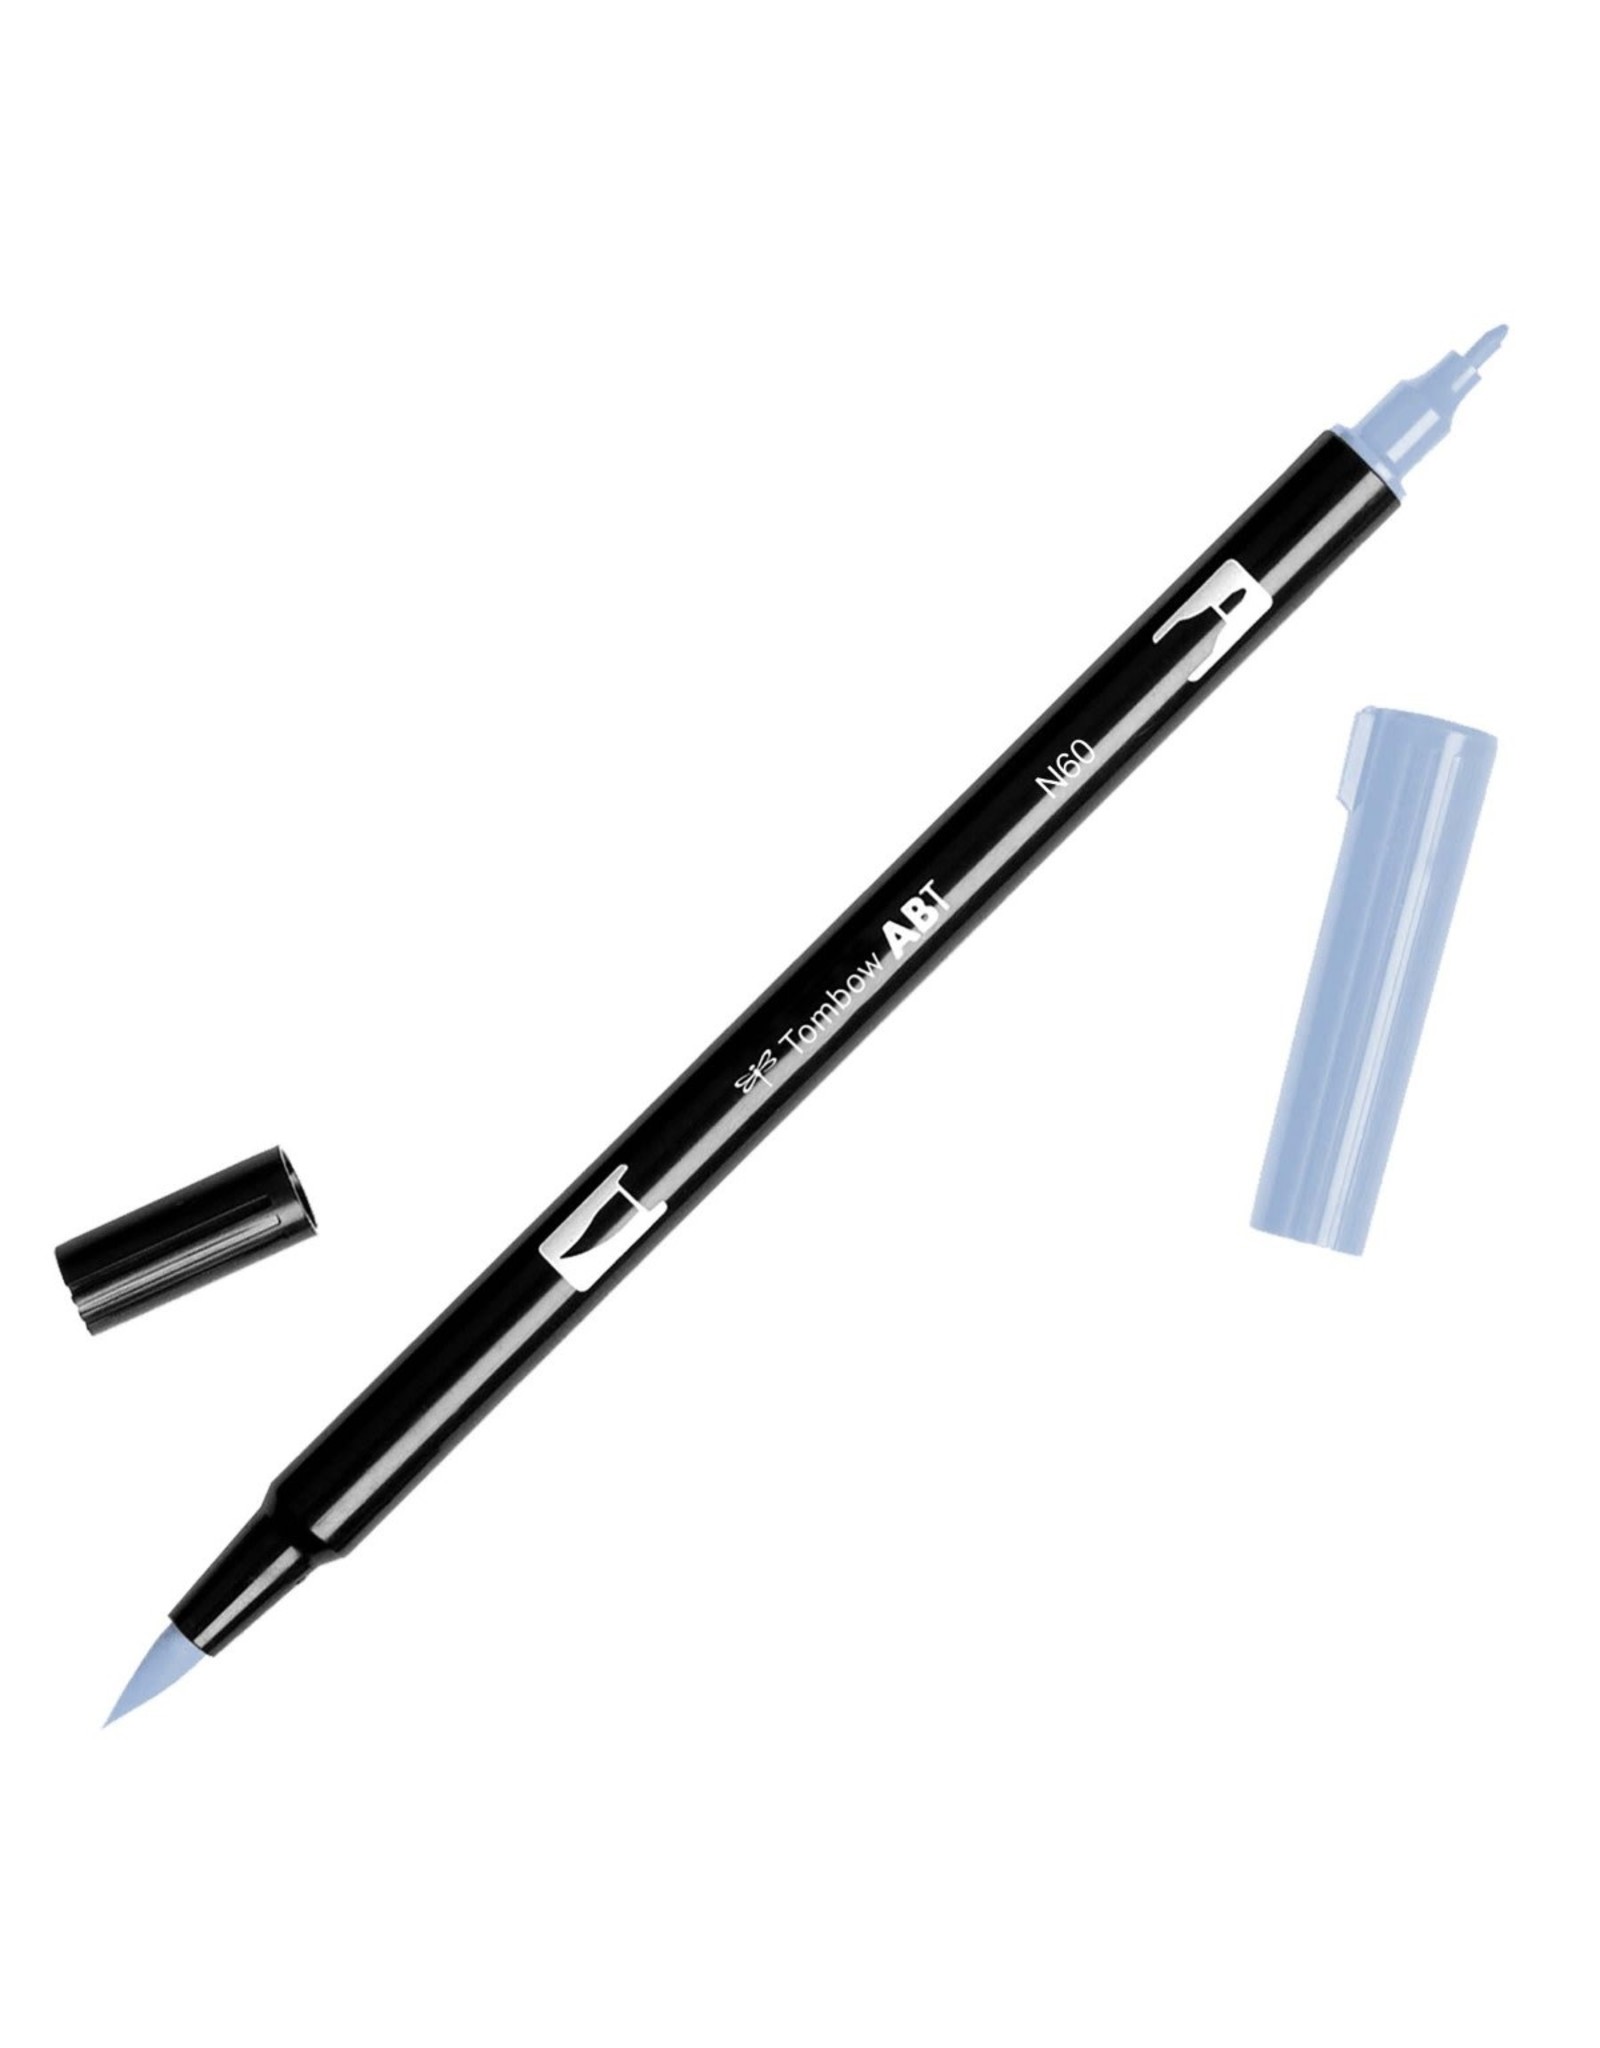 TOMBOW TOMBOW ABT-N60 COOL GRAY 6 DUAL BRUSH MARKER